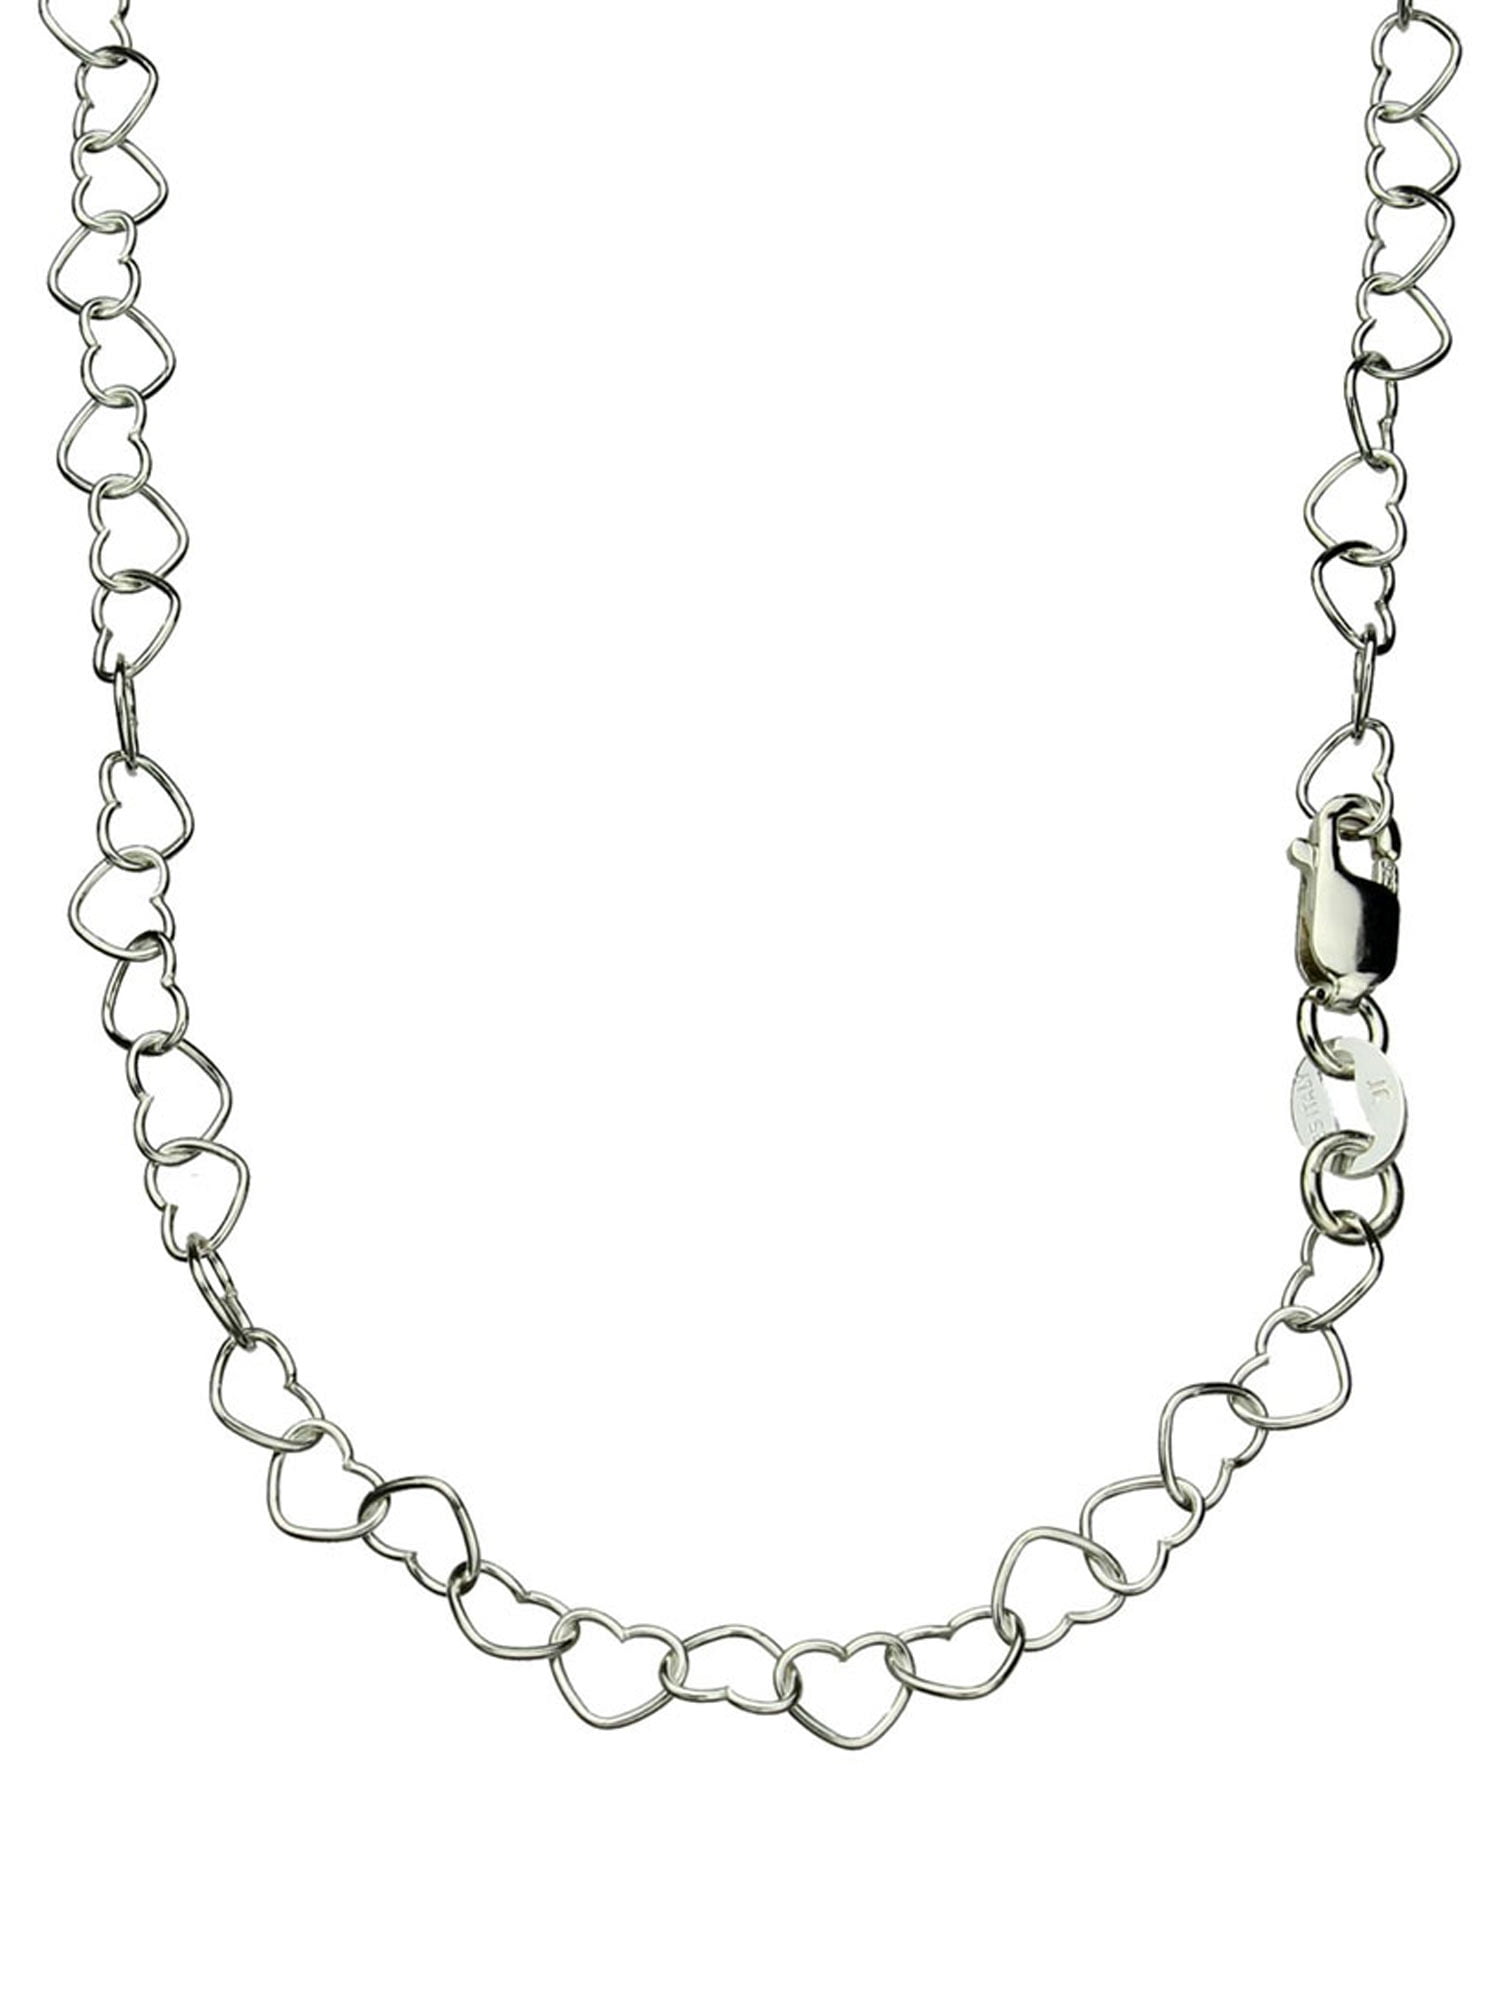 Real .925 Sterling Silver Heart link Chain/Necklace in Different lengths 